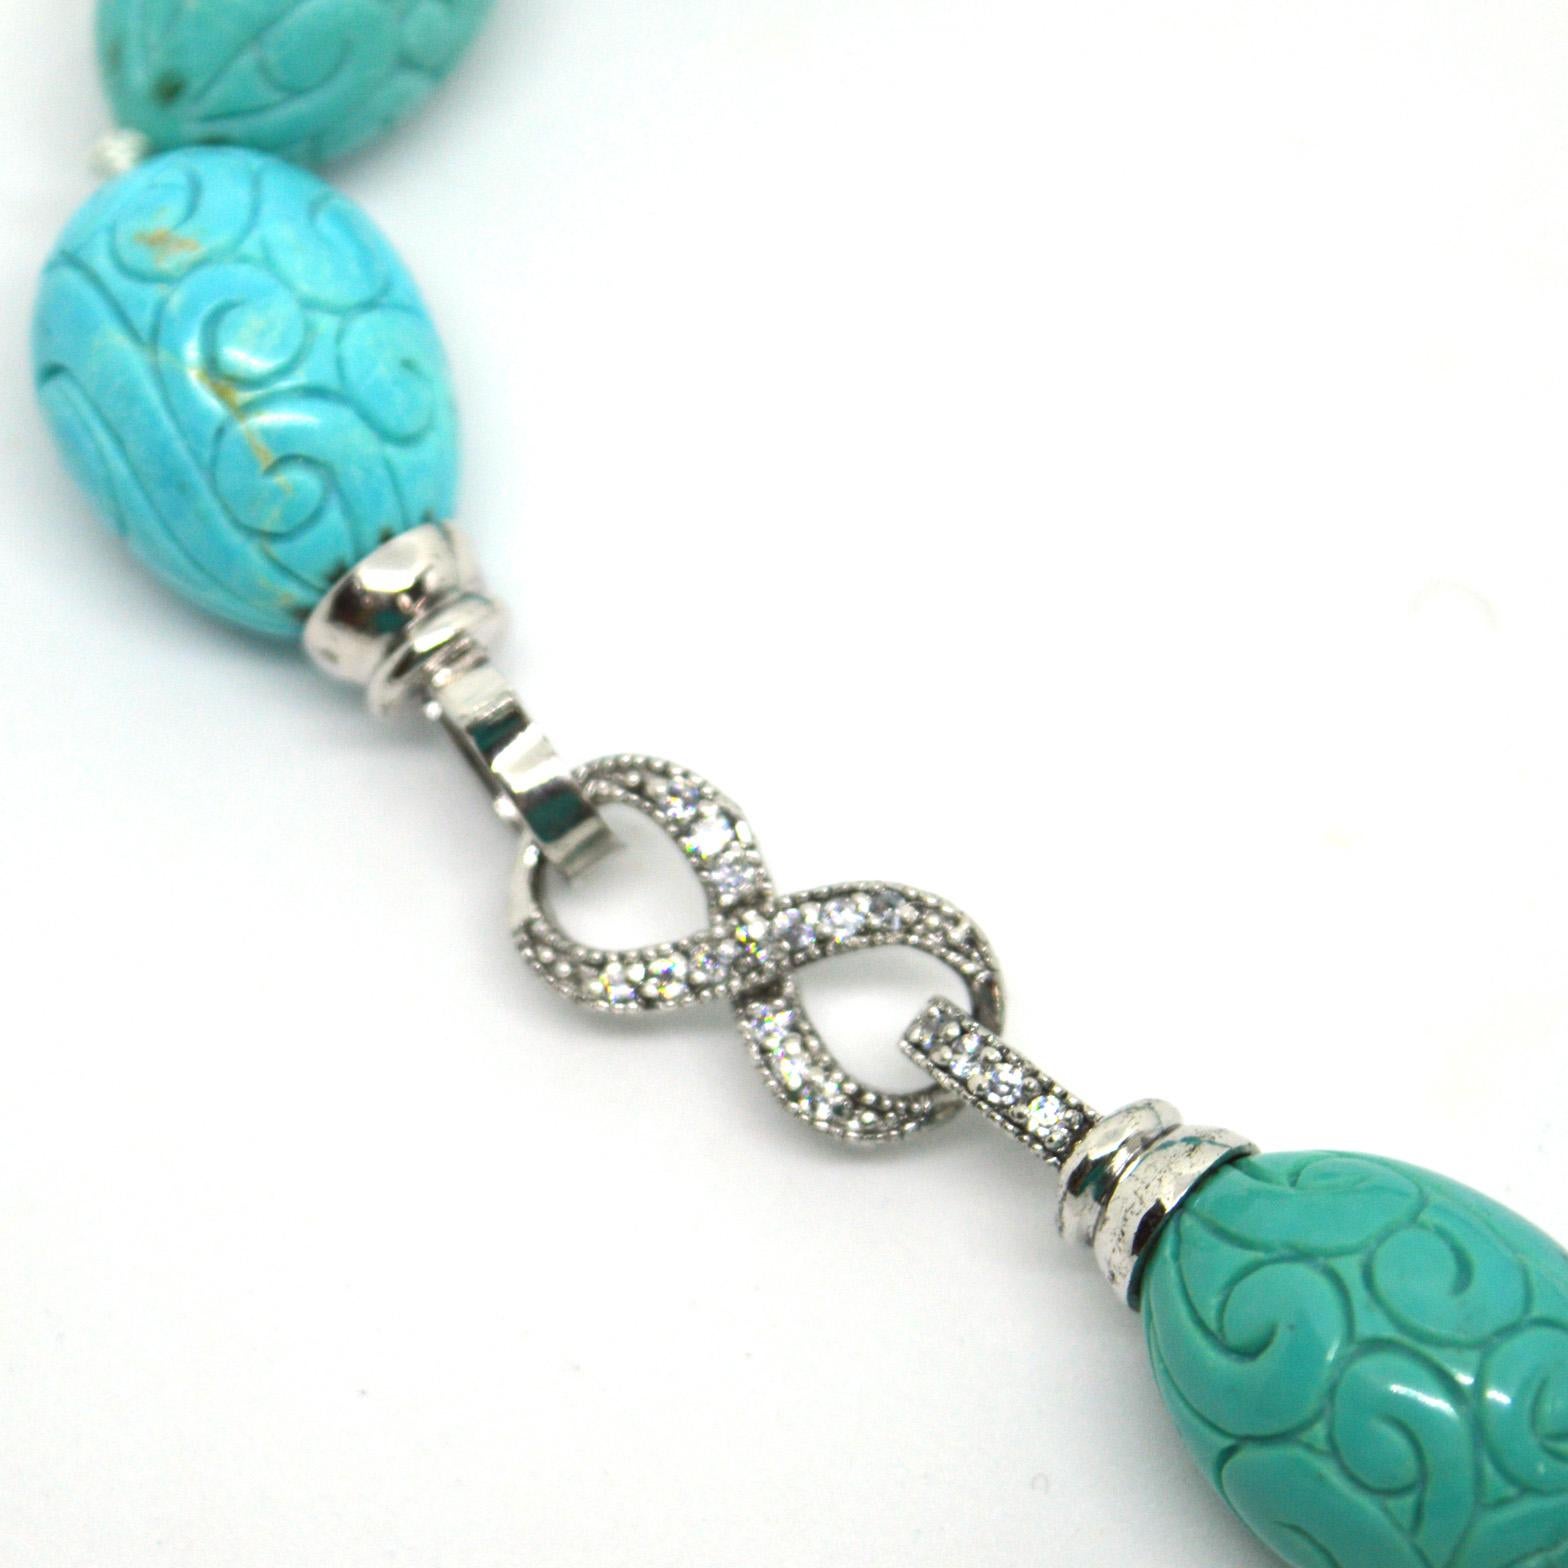 carved turquoise beads